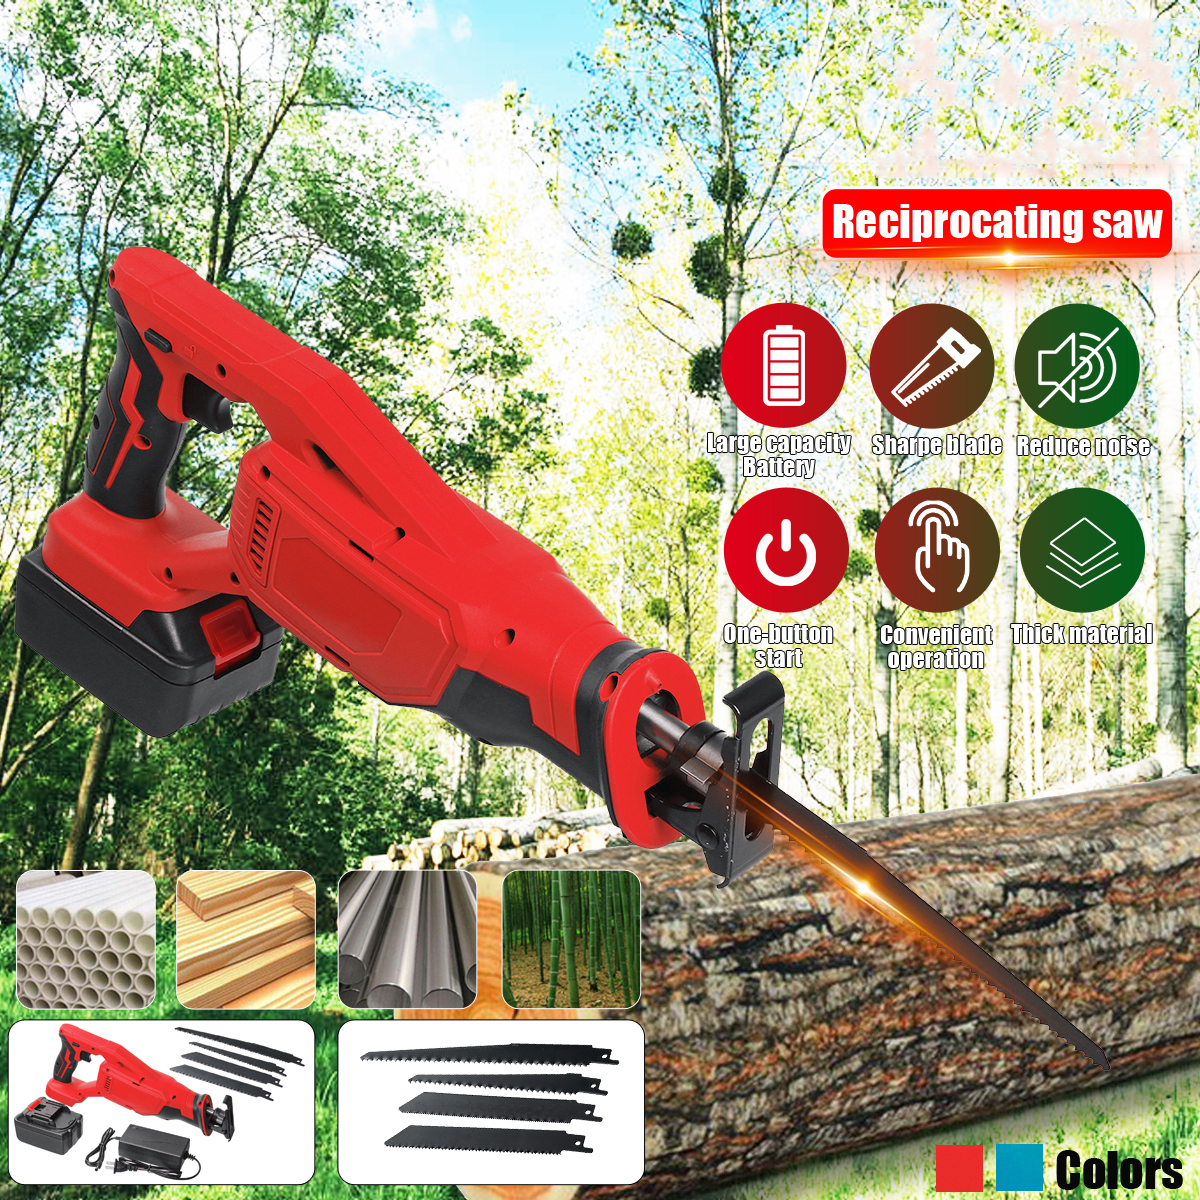 21V-5000Rpm-Reciprocating-Saw-Professional-Electric-Branch-Cutter-Recipro-Saw-W-1pc-Battery-1818077-1